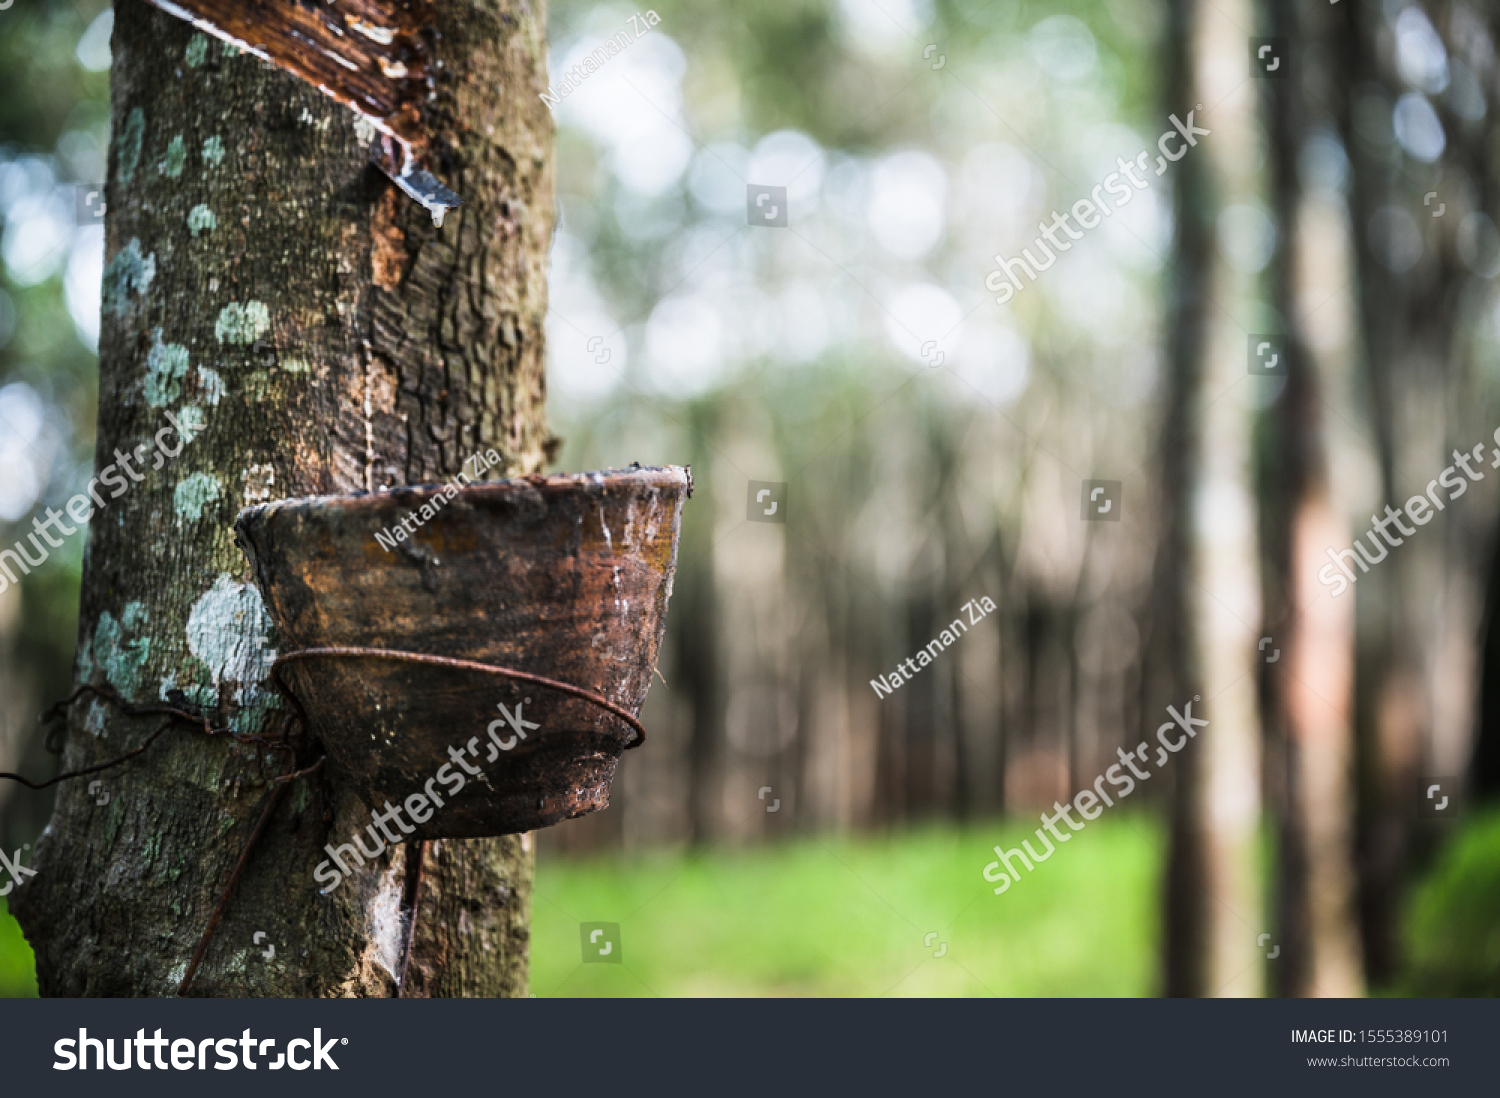 Tapping latex rubber tree, Rubber Latex extracted from rubber tree, harvest in Thailand. #1555389101